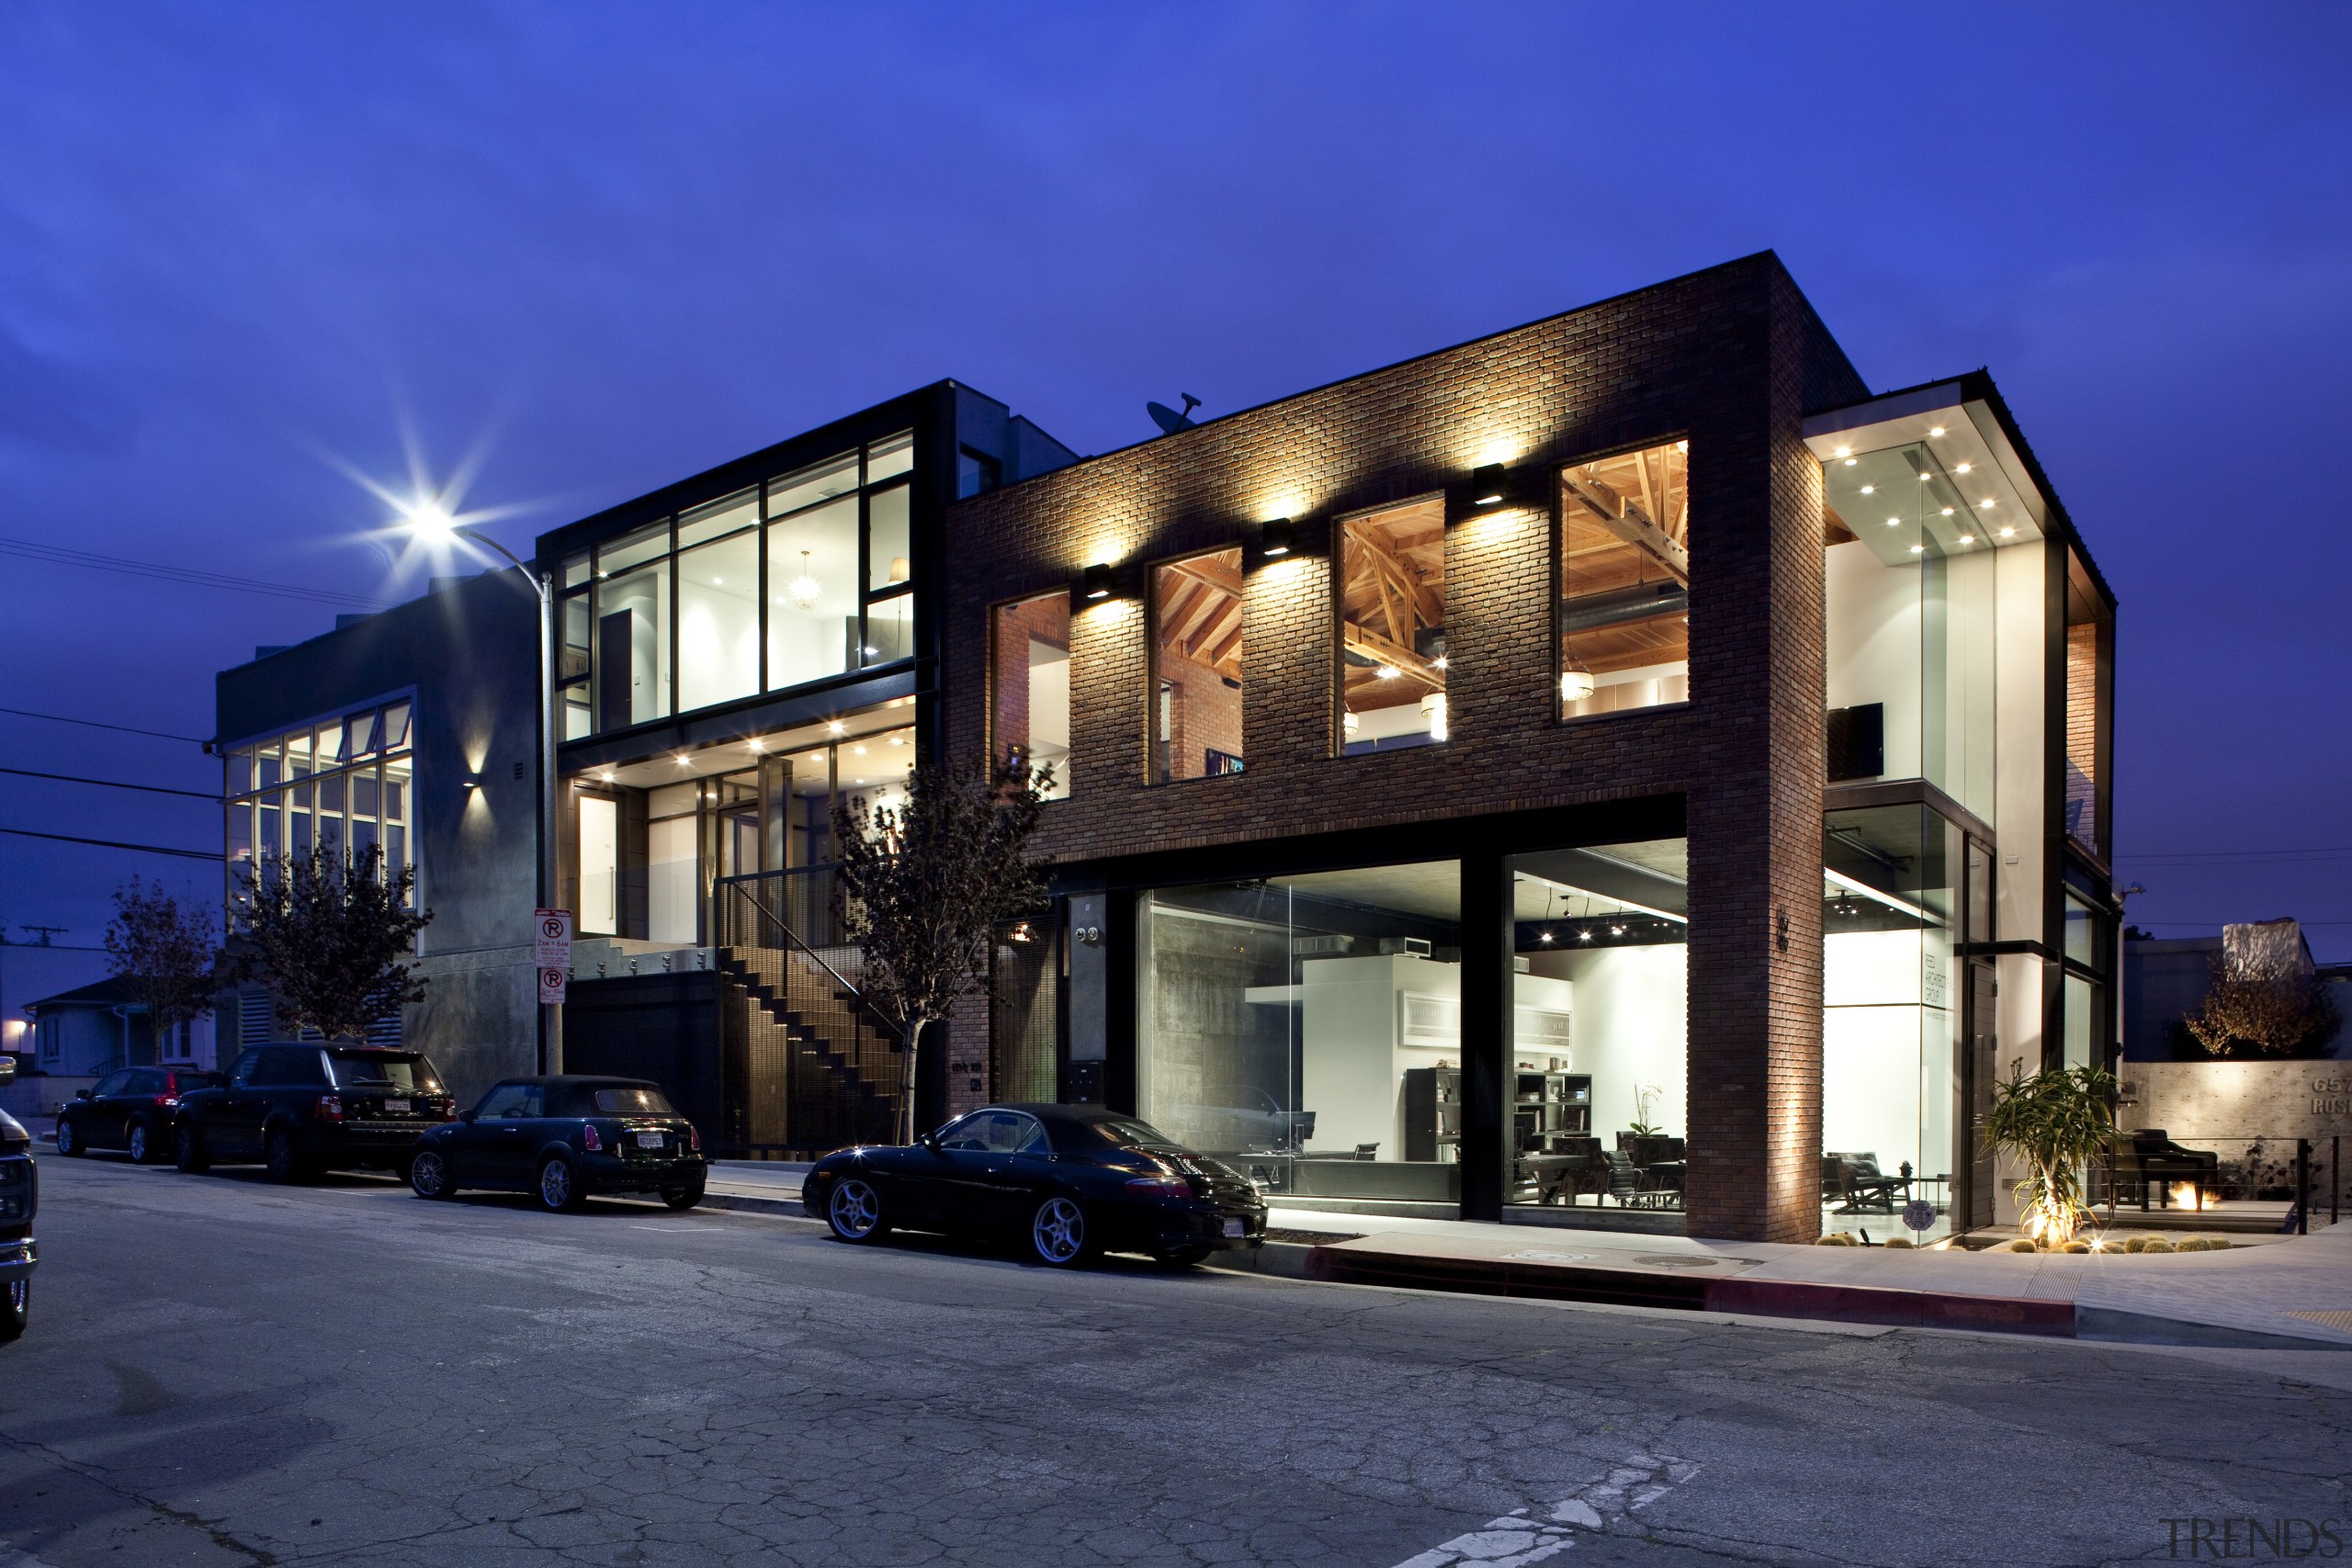 Exterior night shot of contemporary building. - Exterior apartment, architecture, building, commercial building, condominium, evening, facade, home, house, mixed use, neighbourhood, property, real estate, residential area, sky, window, blue